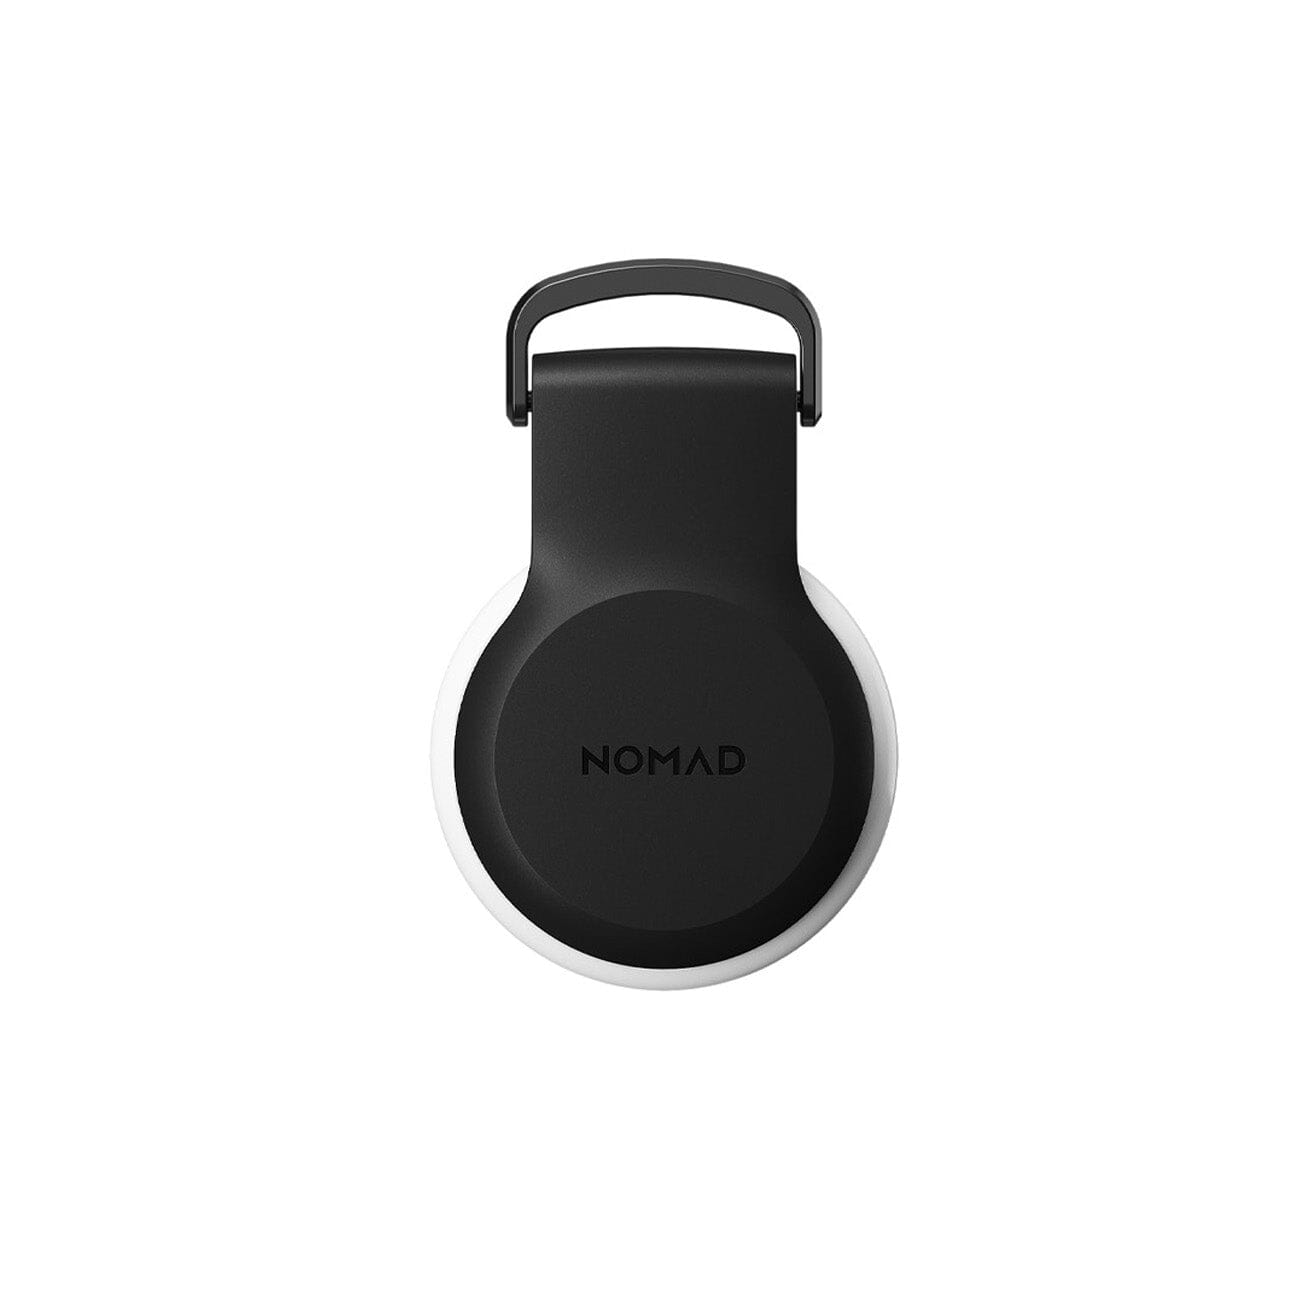 NOMAD Sport Keychain for AirTag, Black ONE2WORLD Black 